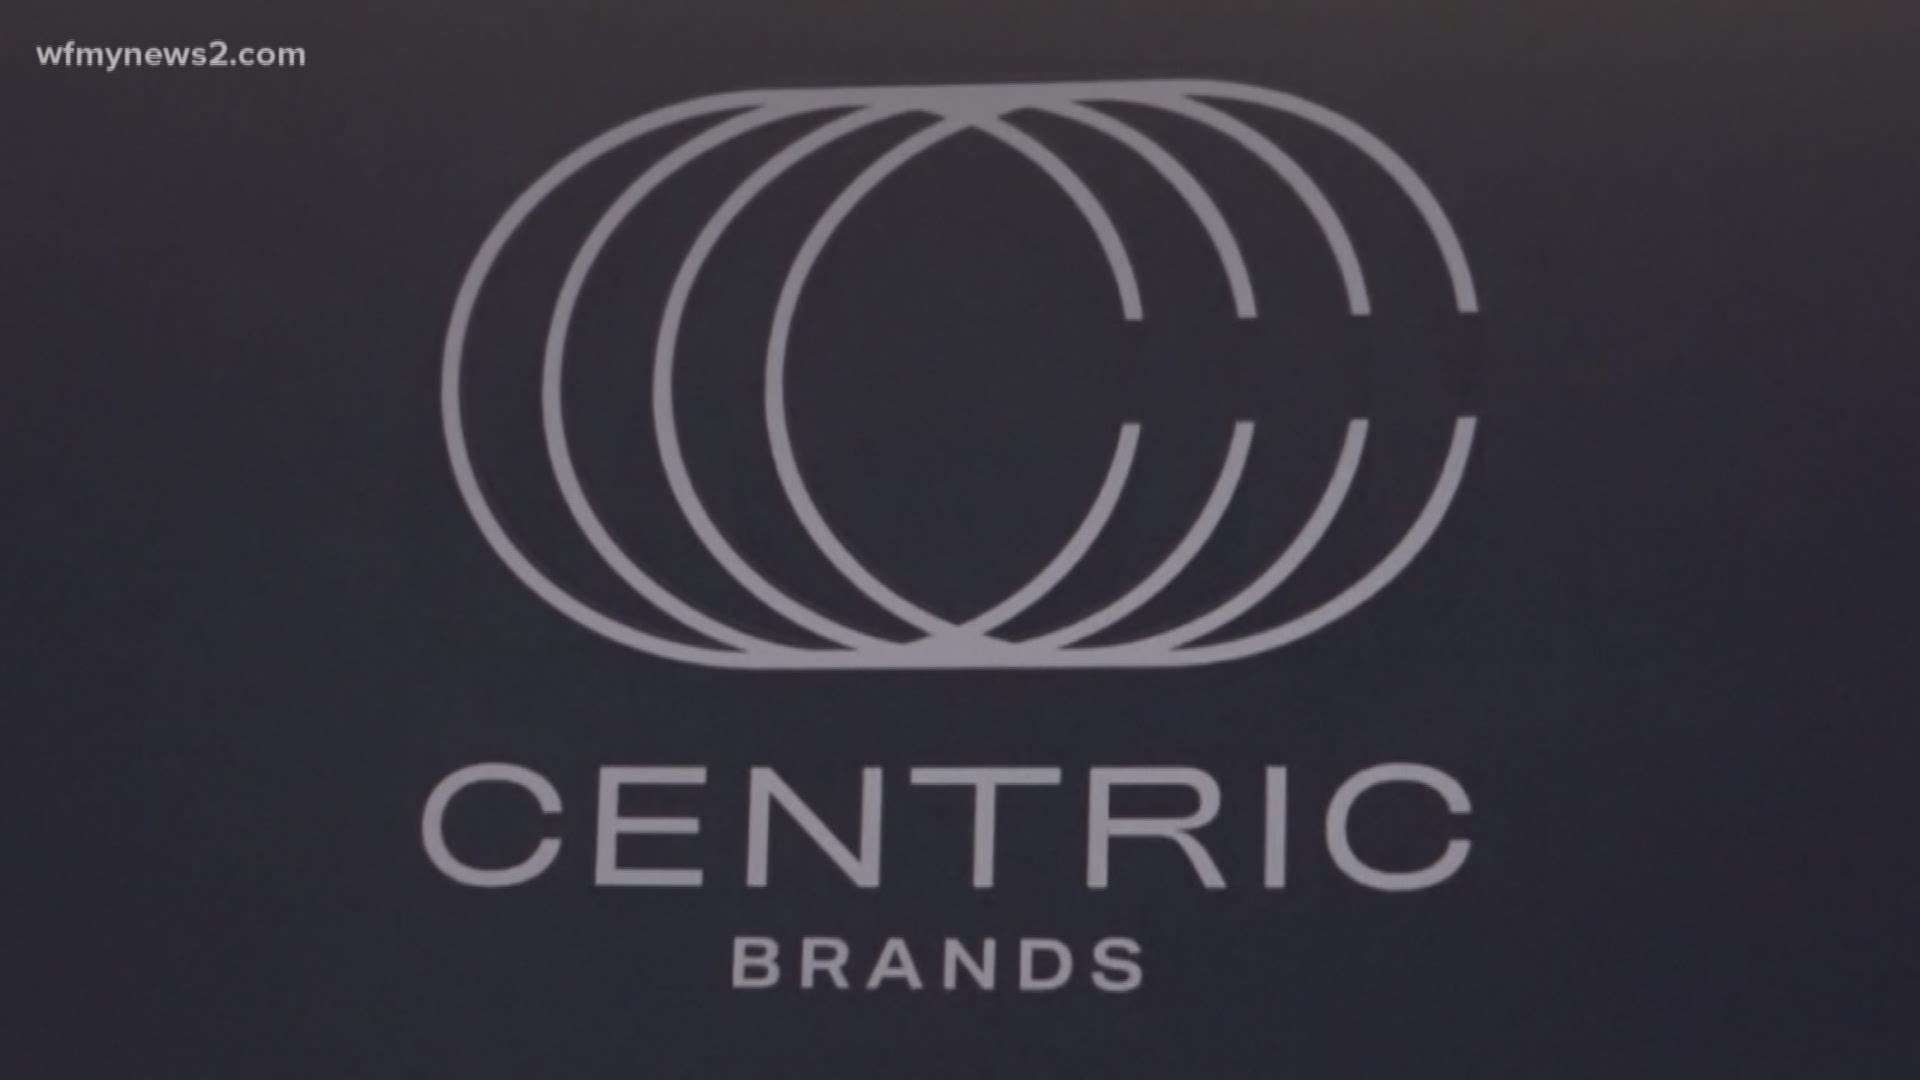 New York City-based Centric Brands will soon move into the gateway center, downtown.